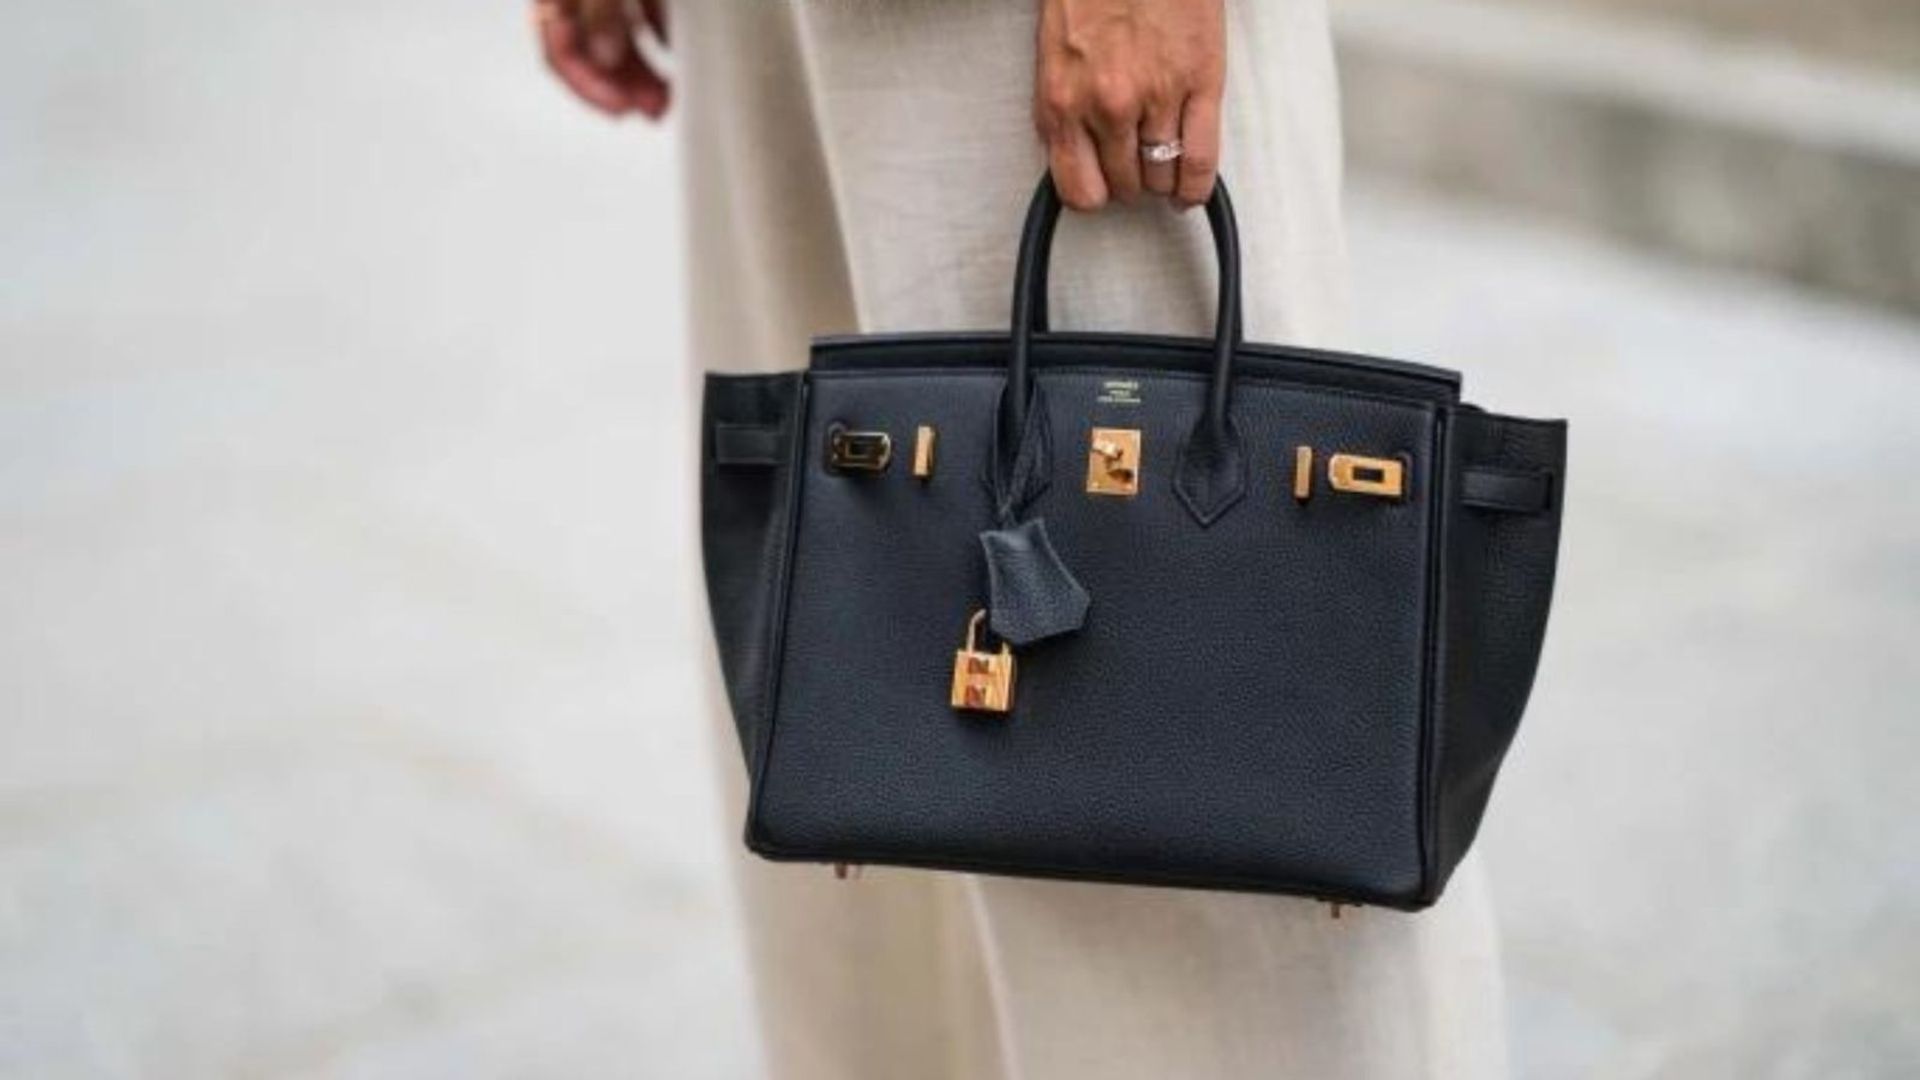 Hermès Birkin has been Crowned the Most Iconic Bag in the World